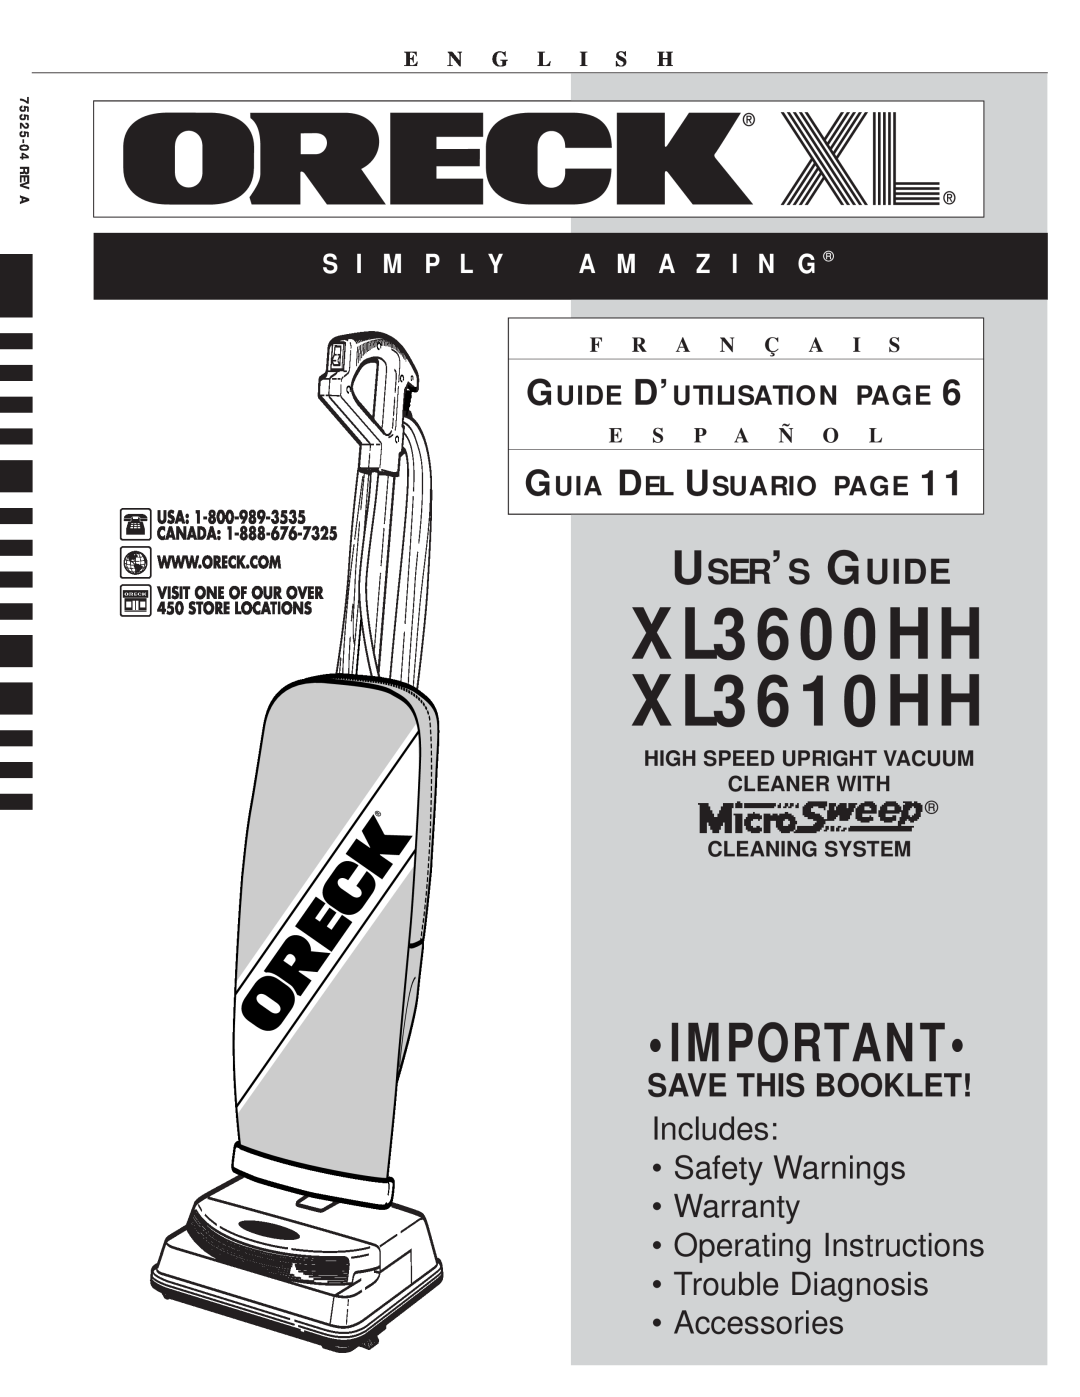 Oreck XL3600HH warranty Save This Booklet, Guide D’Utilisation Page, Guia Del Usuario Page, E N G L I S H, F R A N Ç A 